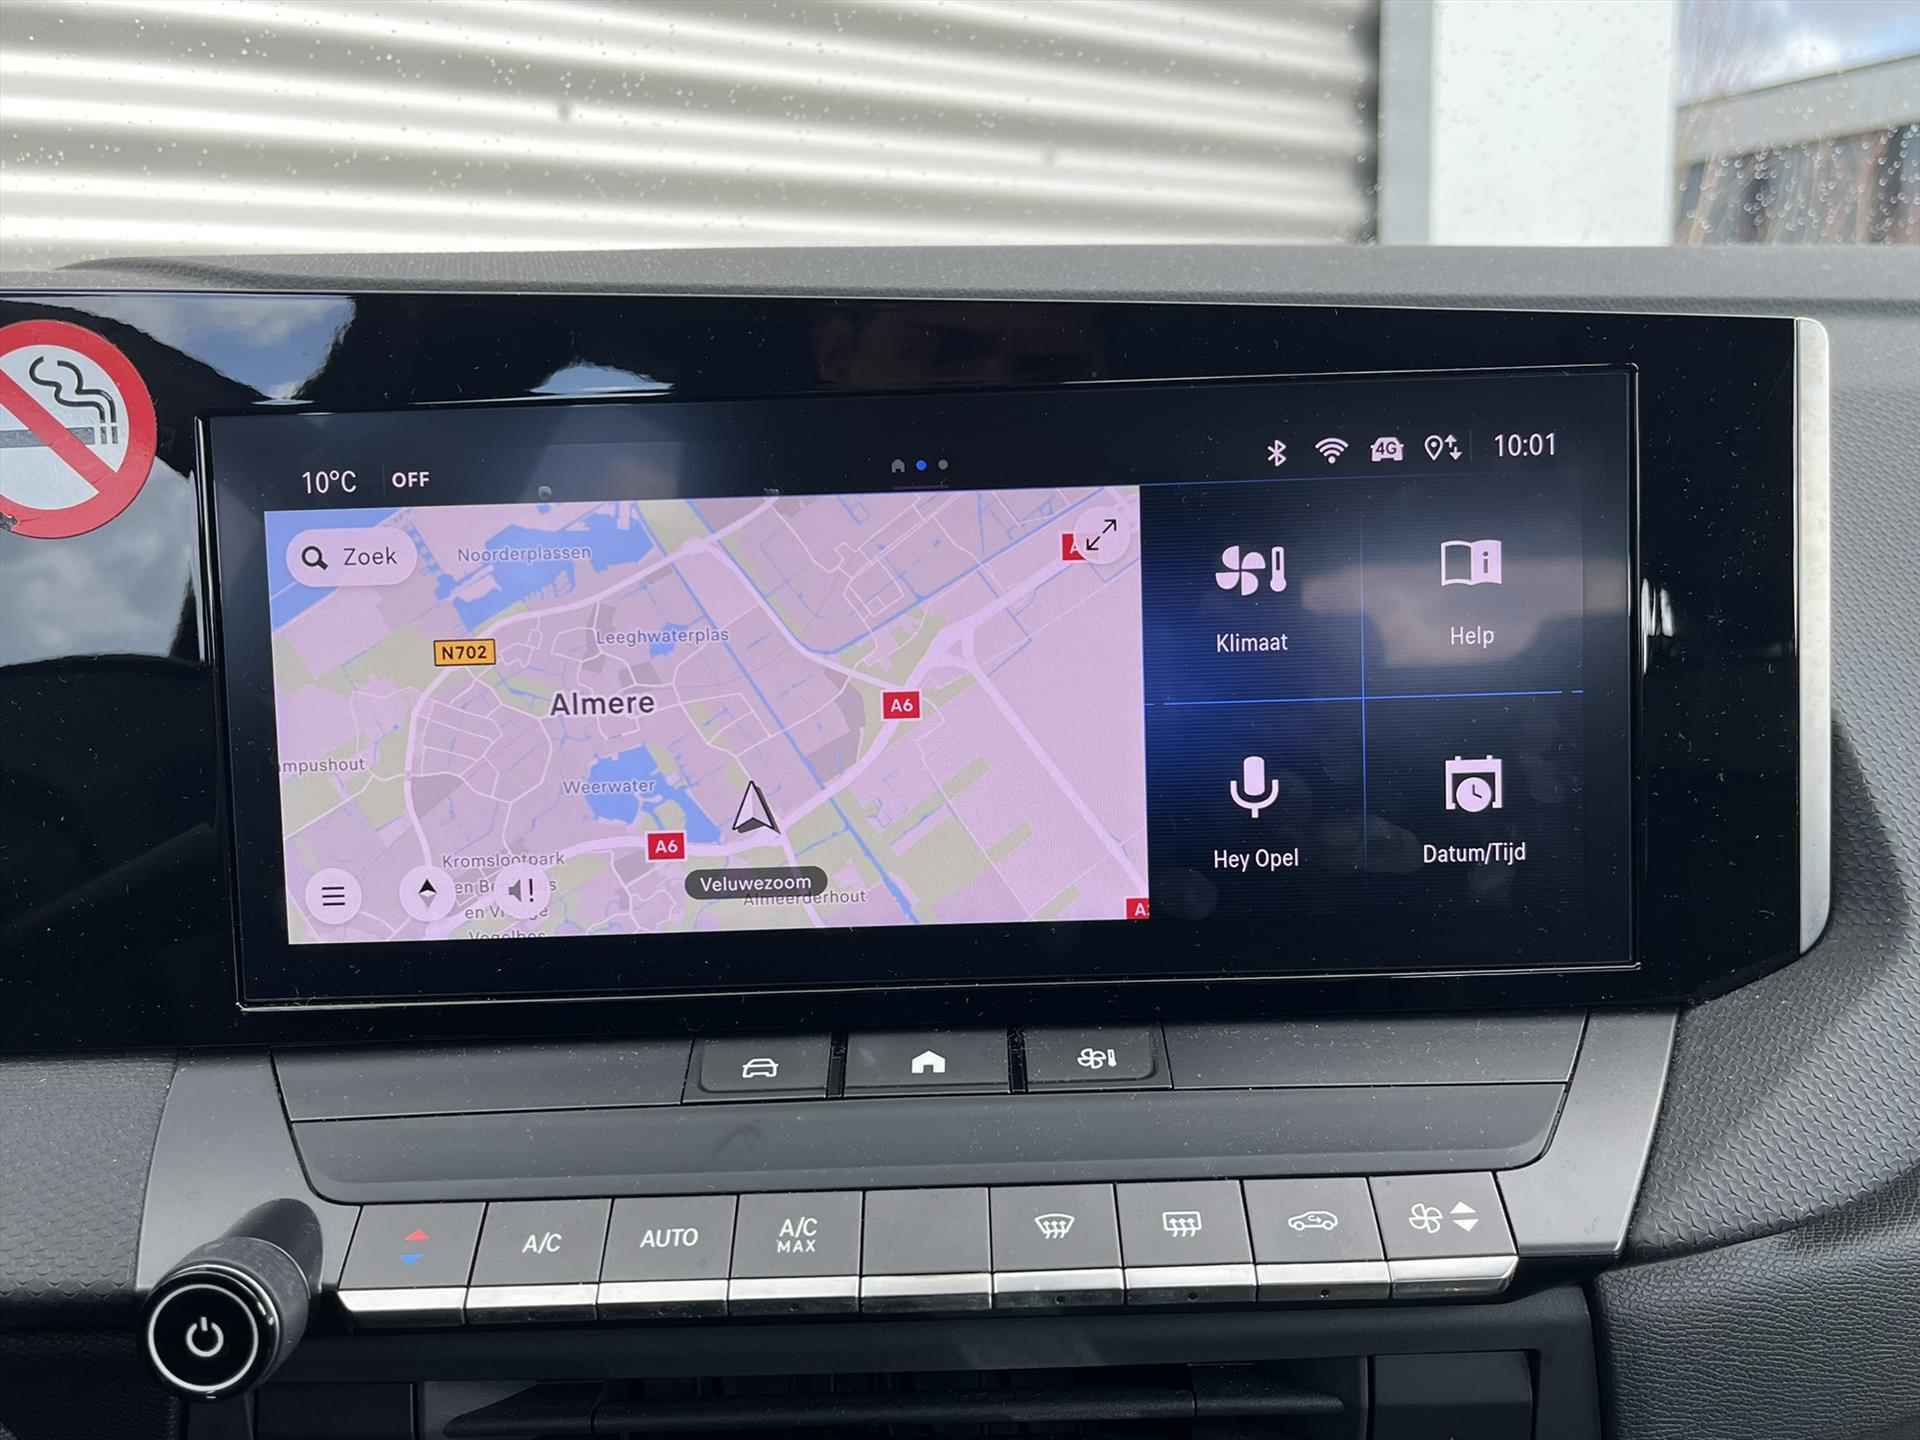 OPEL Astra 1.2 Turbo 110pk Start/Stop Edition | Navigatie | Apple CarPlay / Android Auto | Climate Control - 10/25